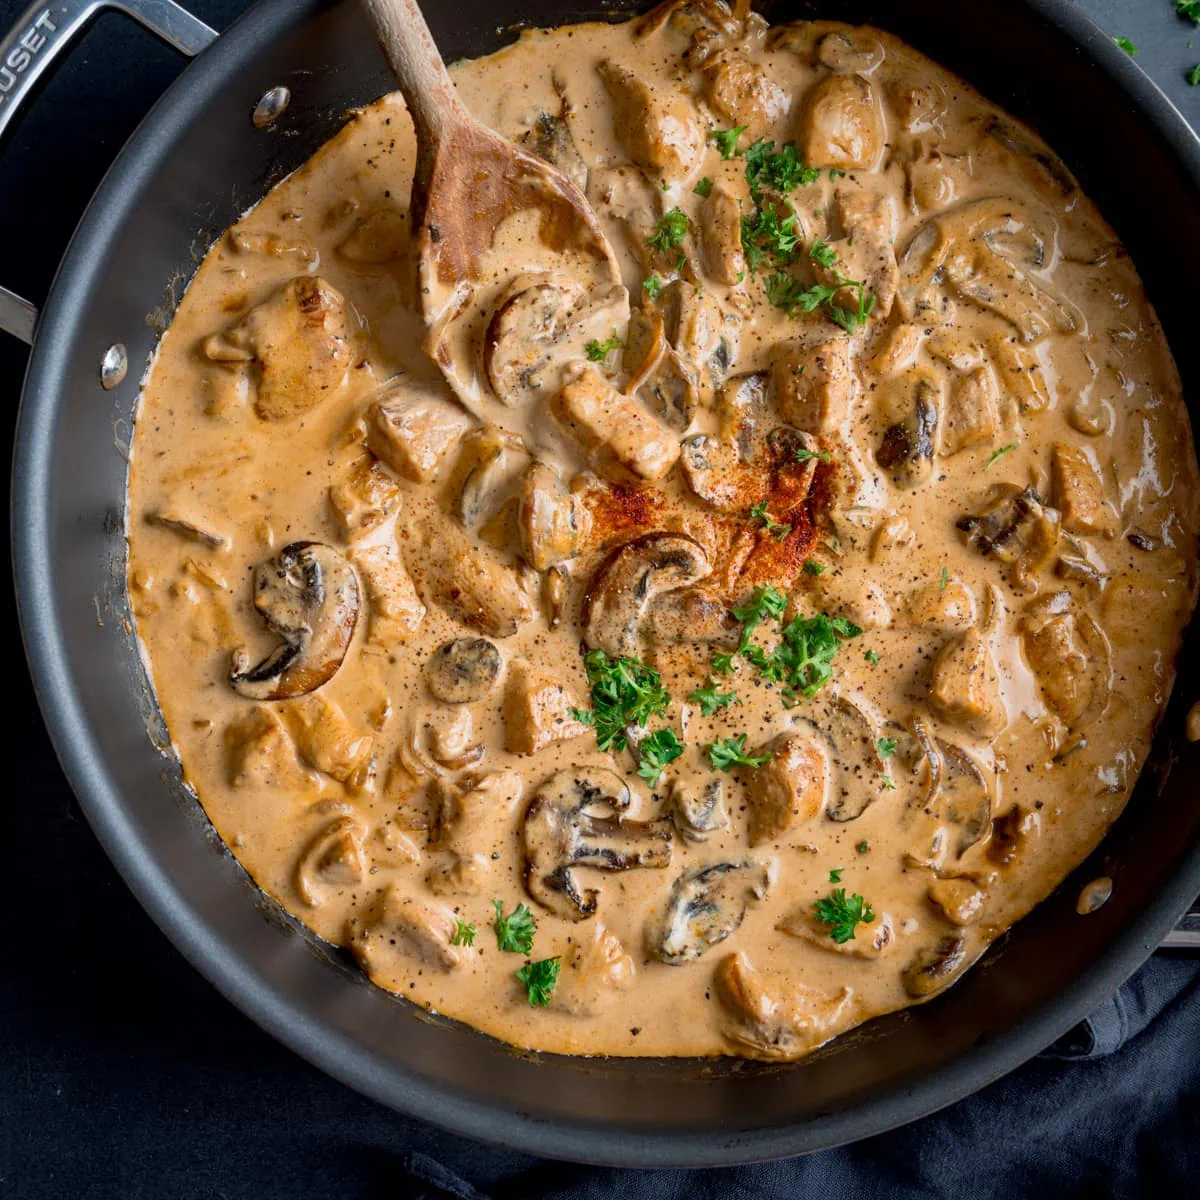 Square overhead image of chicken and mushroom stroganoff in a dark pan. The pan is on a dark surface with a wooden spoon sticking out. The stroganoff is garnished with chopped parsley and paprika.